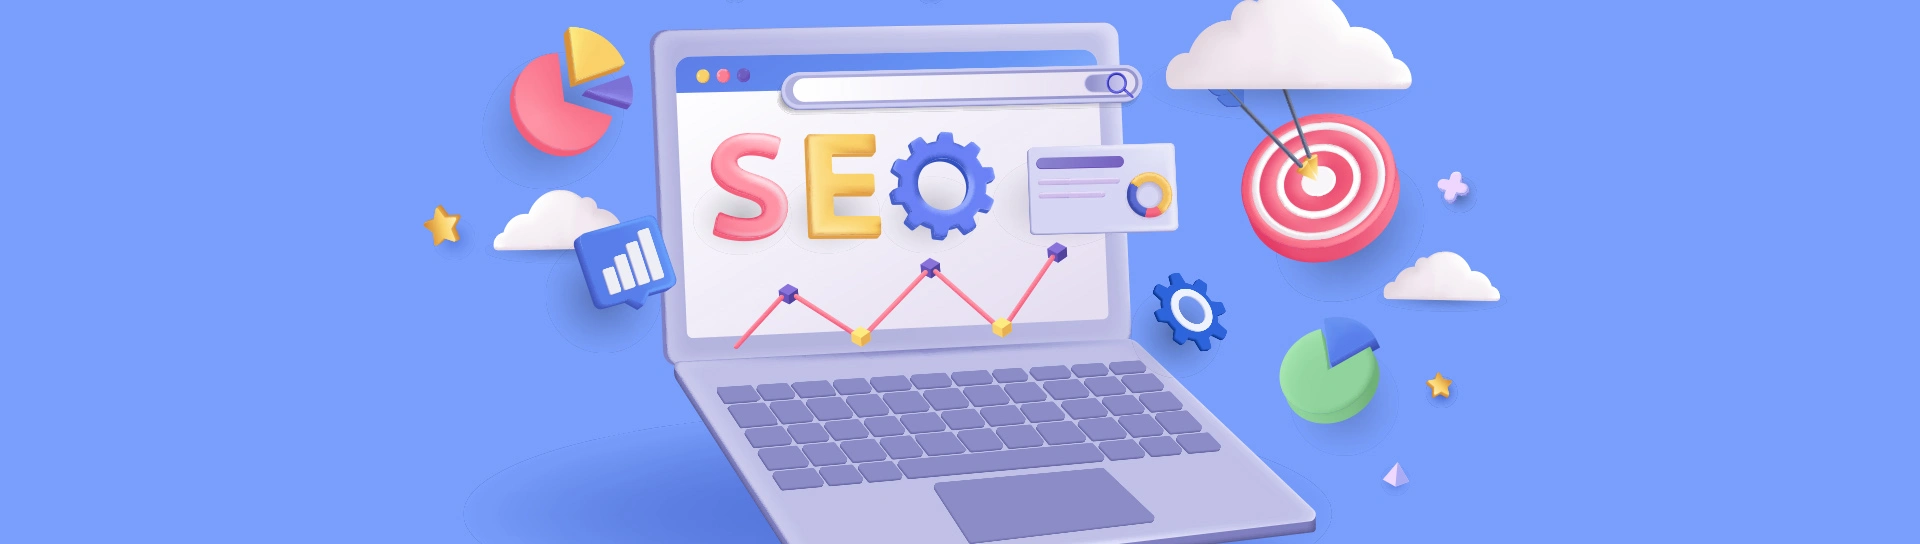 How To Find The Right SEO Service For Your Small Business?